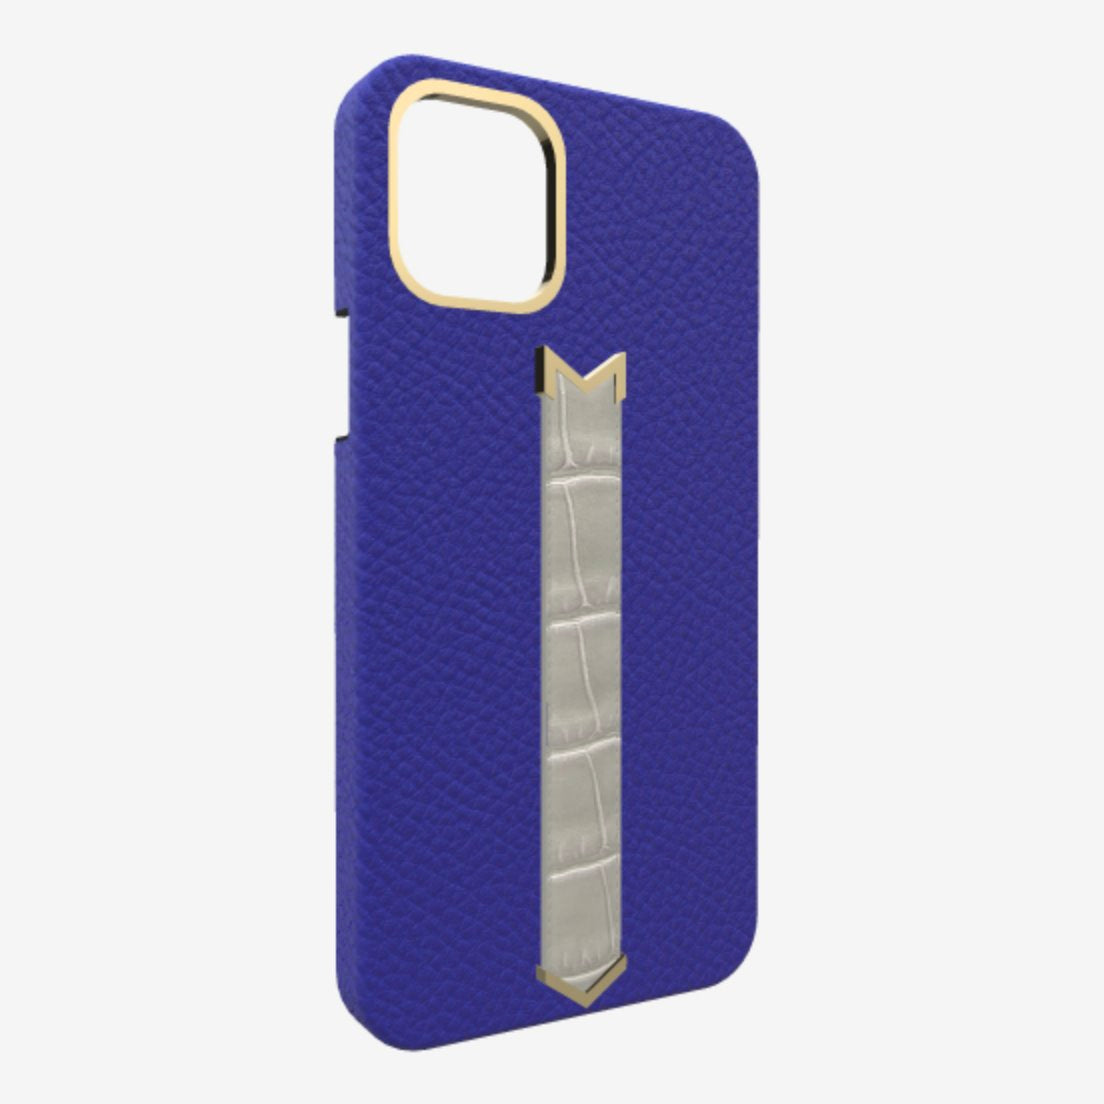 Gold Finger Strap Case for iPhone 13 Pro in Genuine Calfskin and Alligator Electric Blue Pearl Grey 